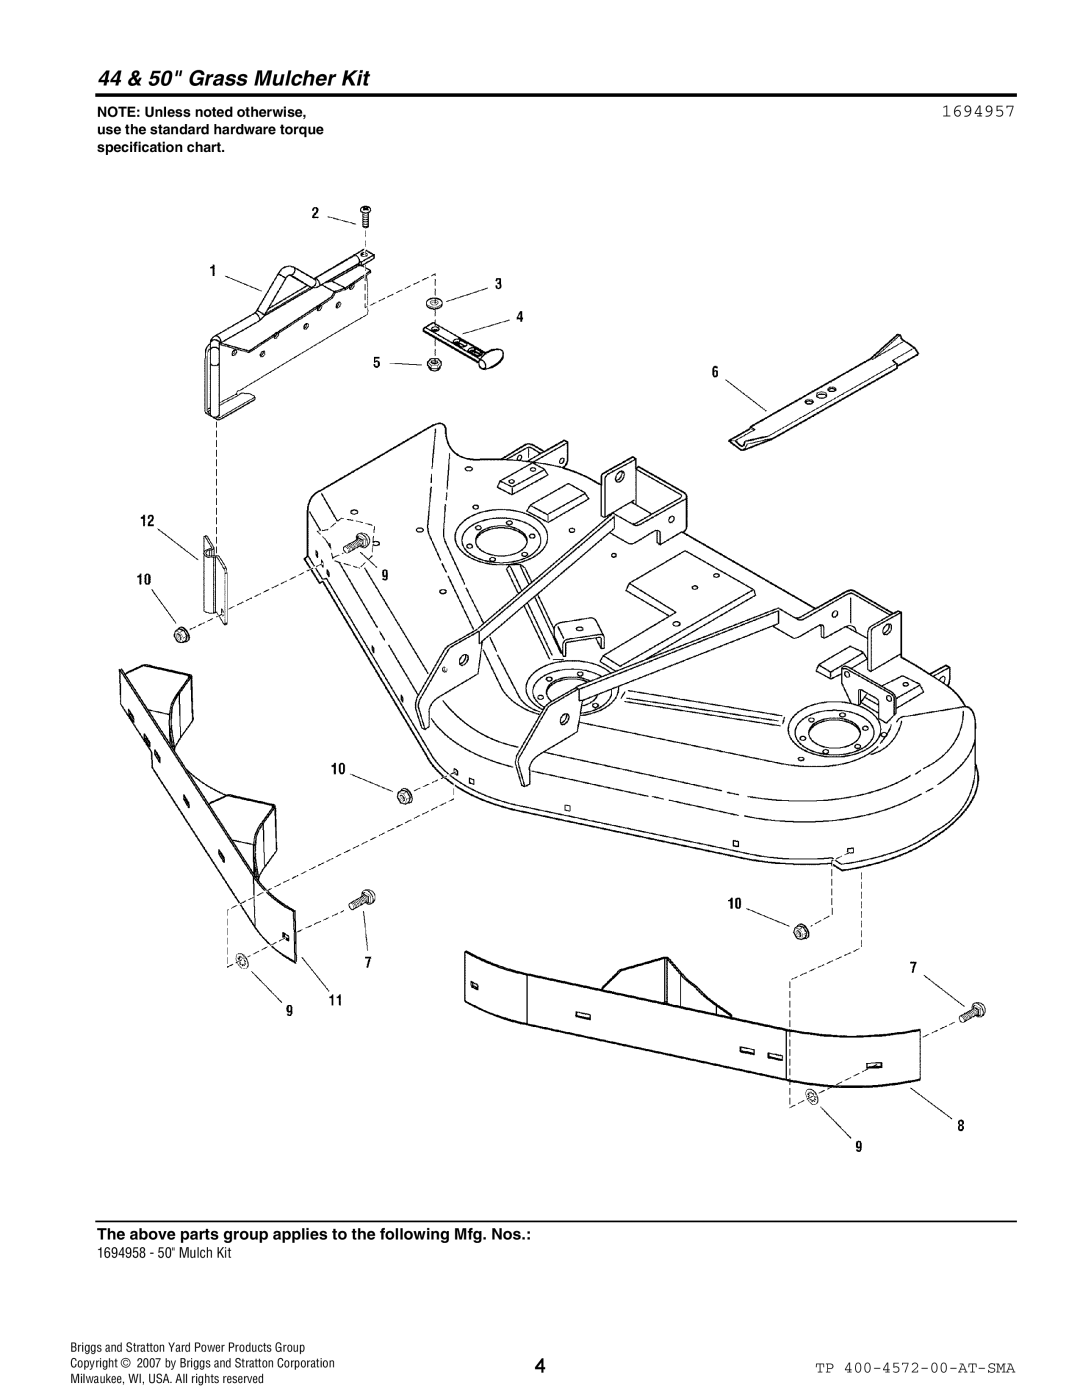 Simplicity 1694958 manual 44 & 50 Grass Mulcher Kit, 1694957, NOTE: Unless noted otherwise 